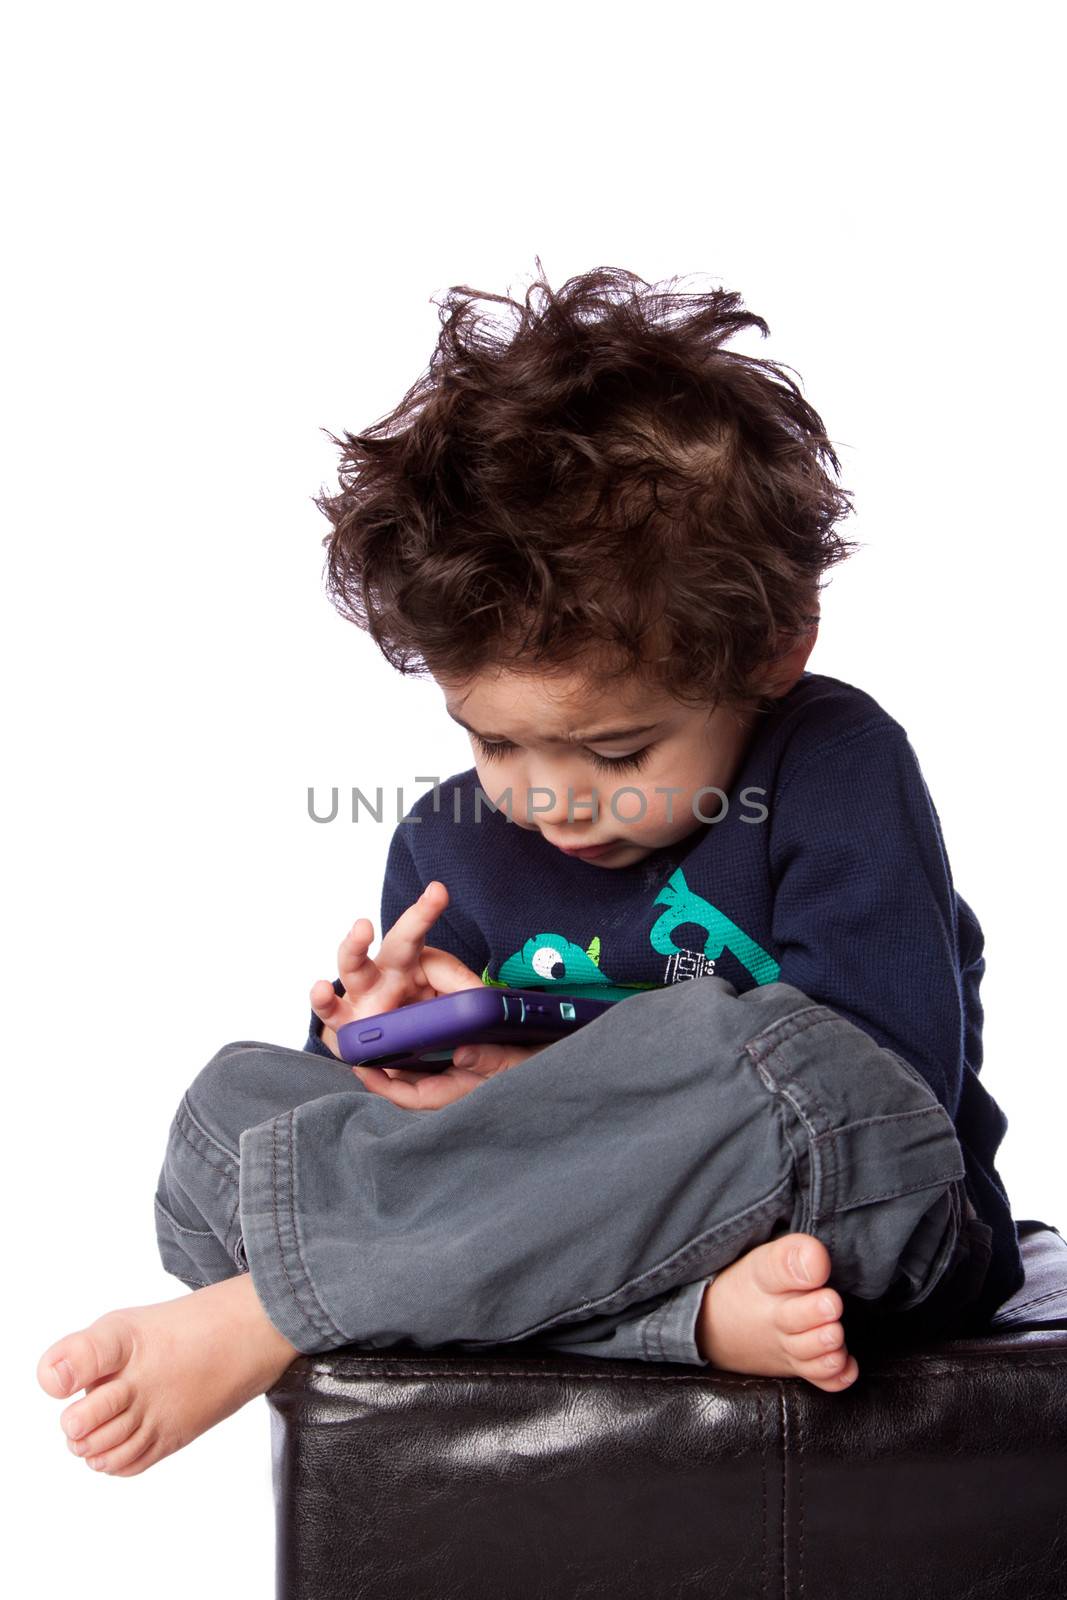 Cute toddler boy sitting playing games on mobile device and crazy hair, isolated.